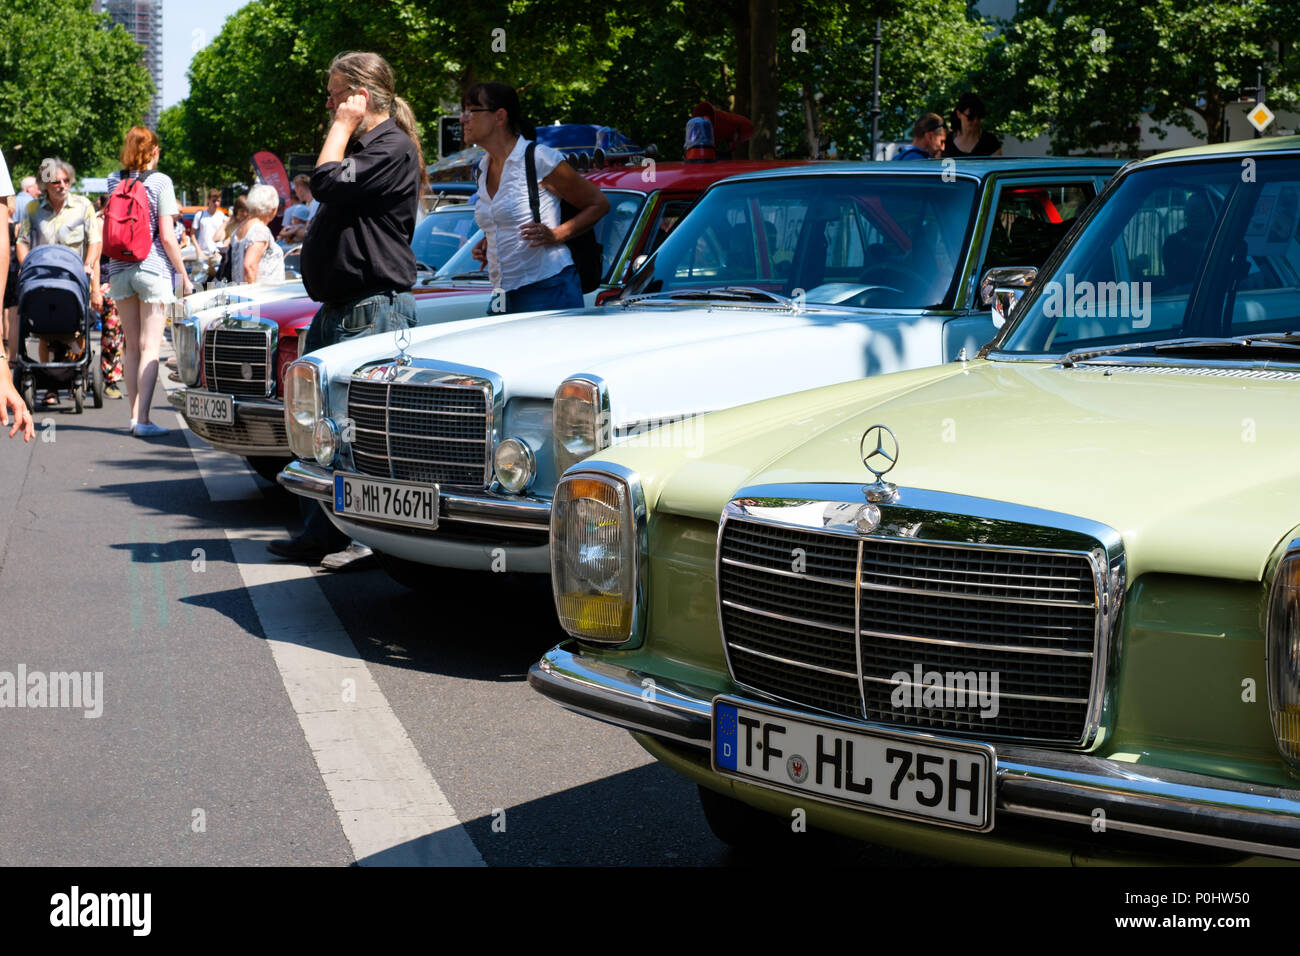 Berlin, Germany - june 09, 2018: Old Mercedes Benz cars at Classic Days, a Oldtimer automobile event showing more than 2000 vintage cars at Kurfuerstendamm / Kudamm in Berlin Credit: hanohiki/Alamy Live News Stock Photo